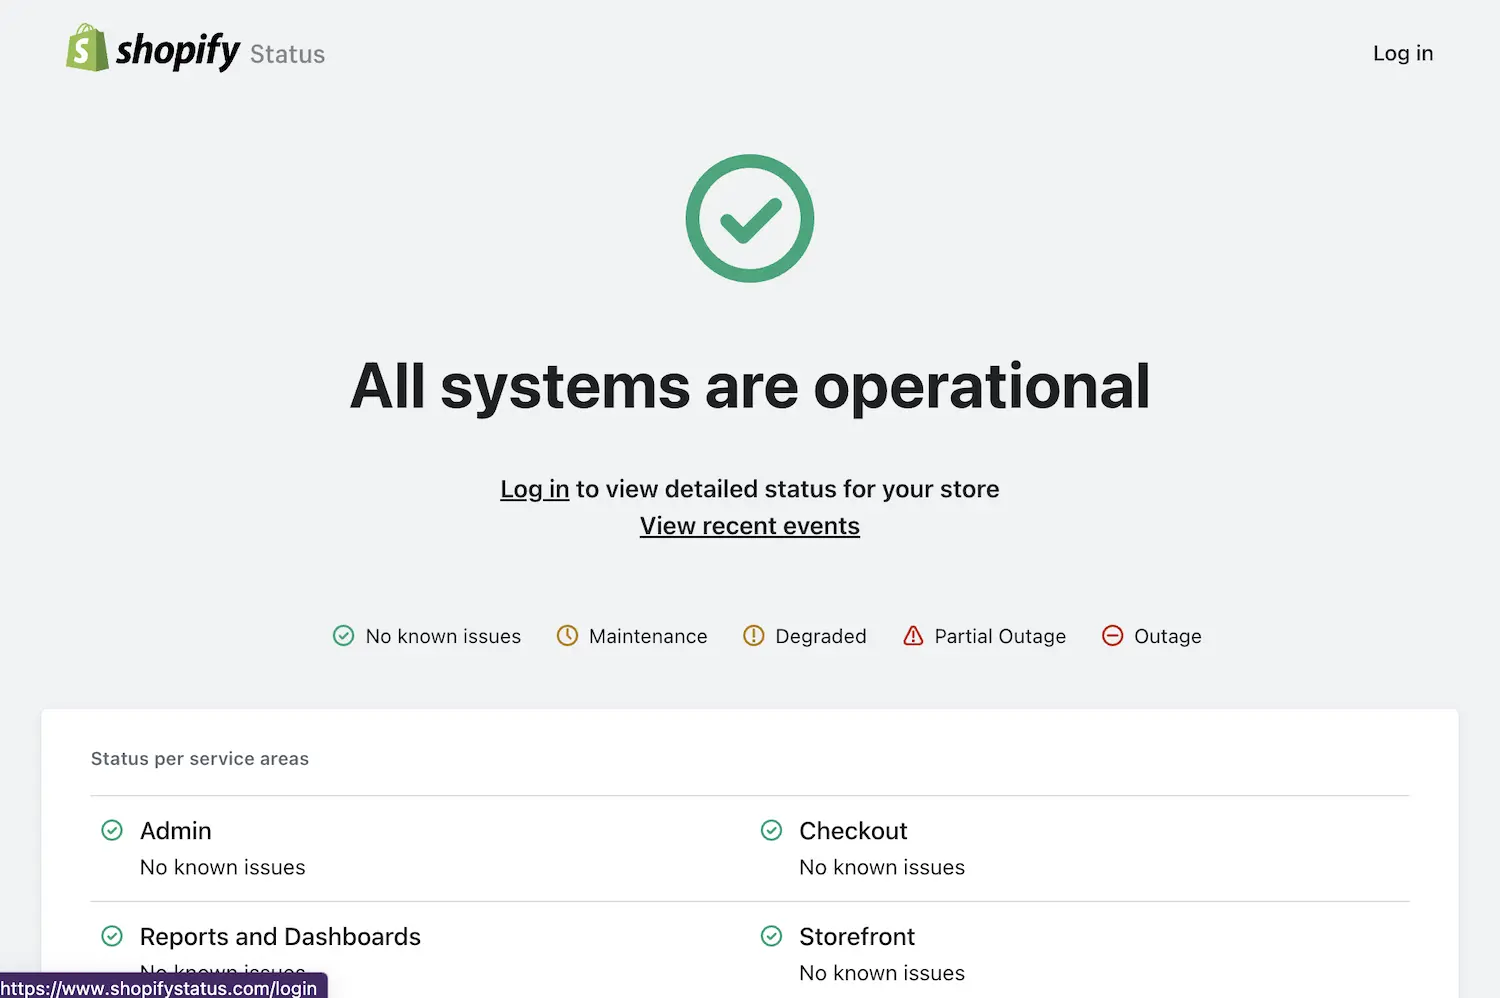 The Shopify Status dashboard which shows the operational status of all of Shopify.